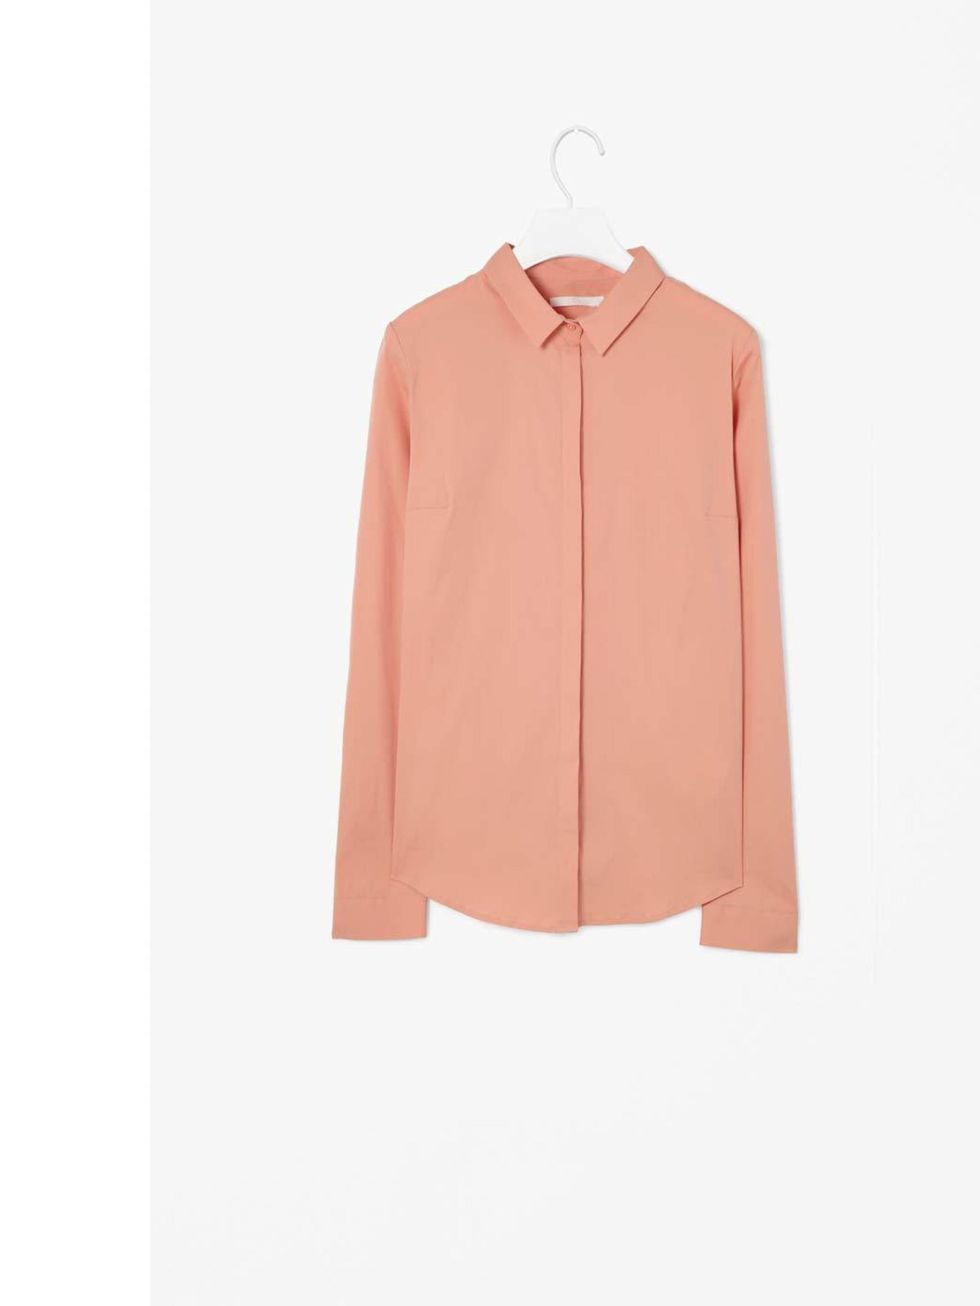 <p>The clean lines and cut of this shirt fit well with the ongoing minimal trend but the soft apricot keeps it feminine and pretty and would work well with blue denims or smarter navy tailored pieces. Slim Fit Shirt, £45 <a href="http://www.cosstores.com/